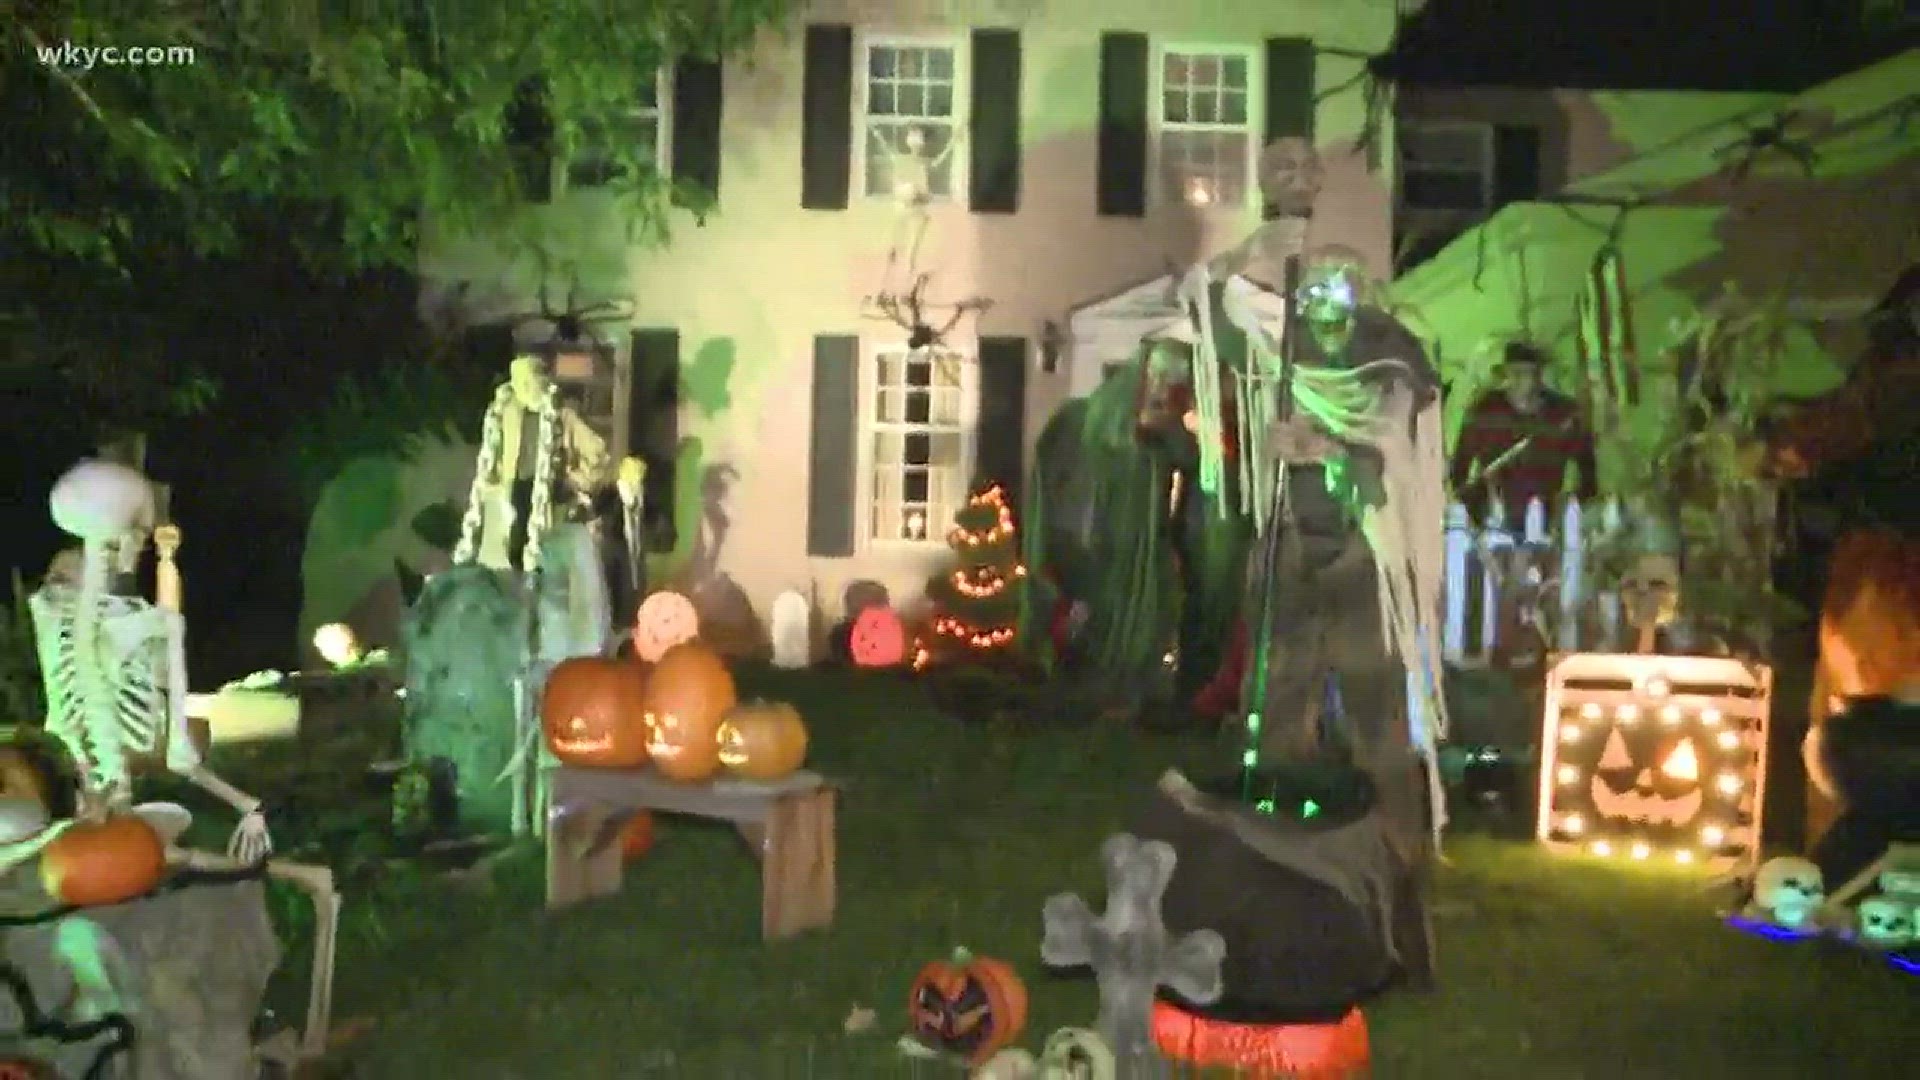 Oct. 30, 2017: A WKYC viewer told us to check out his Halloween decorations in Strongsville on Huntington Park Drive. It looks super spooky!